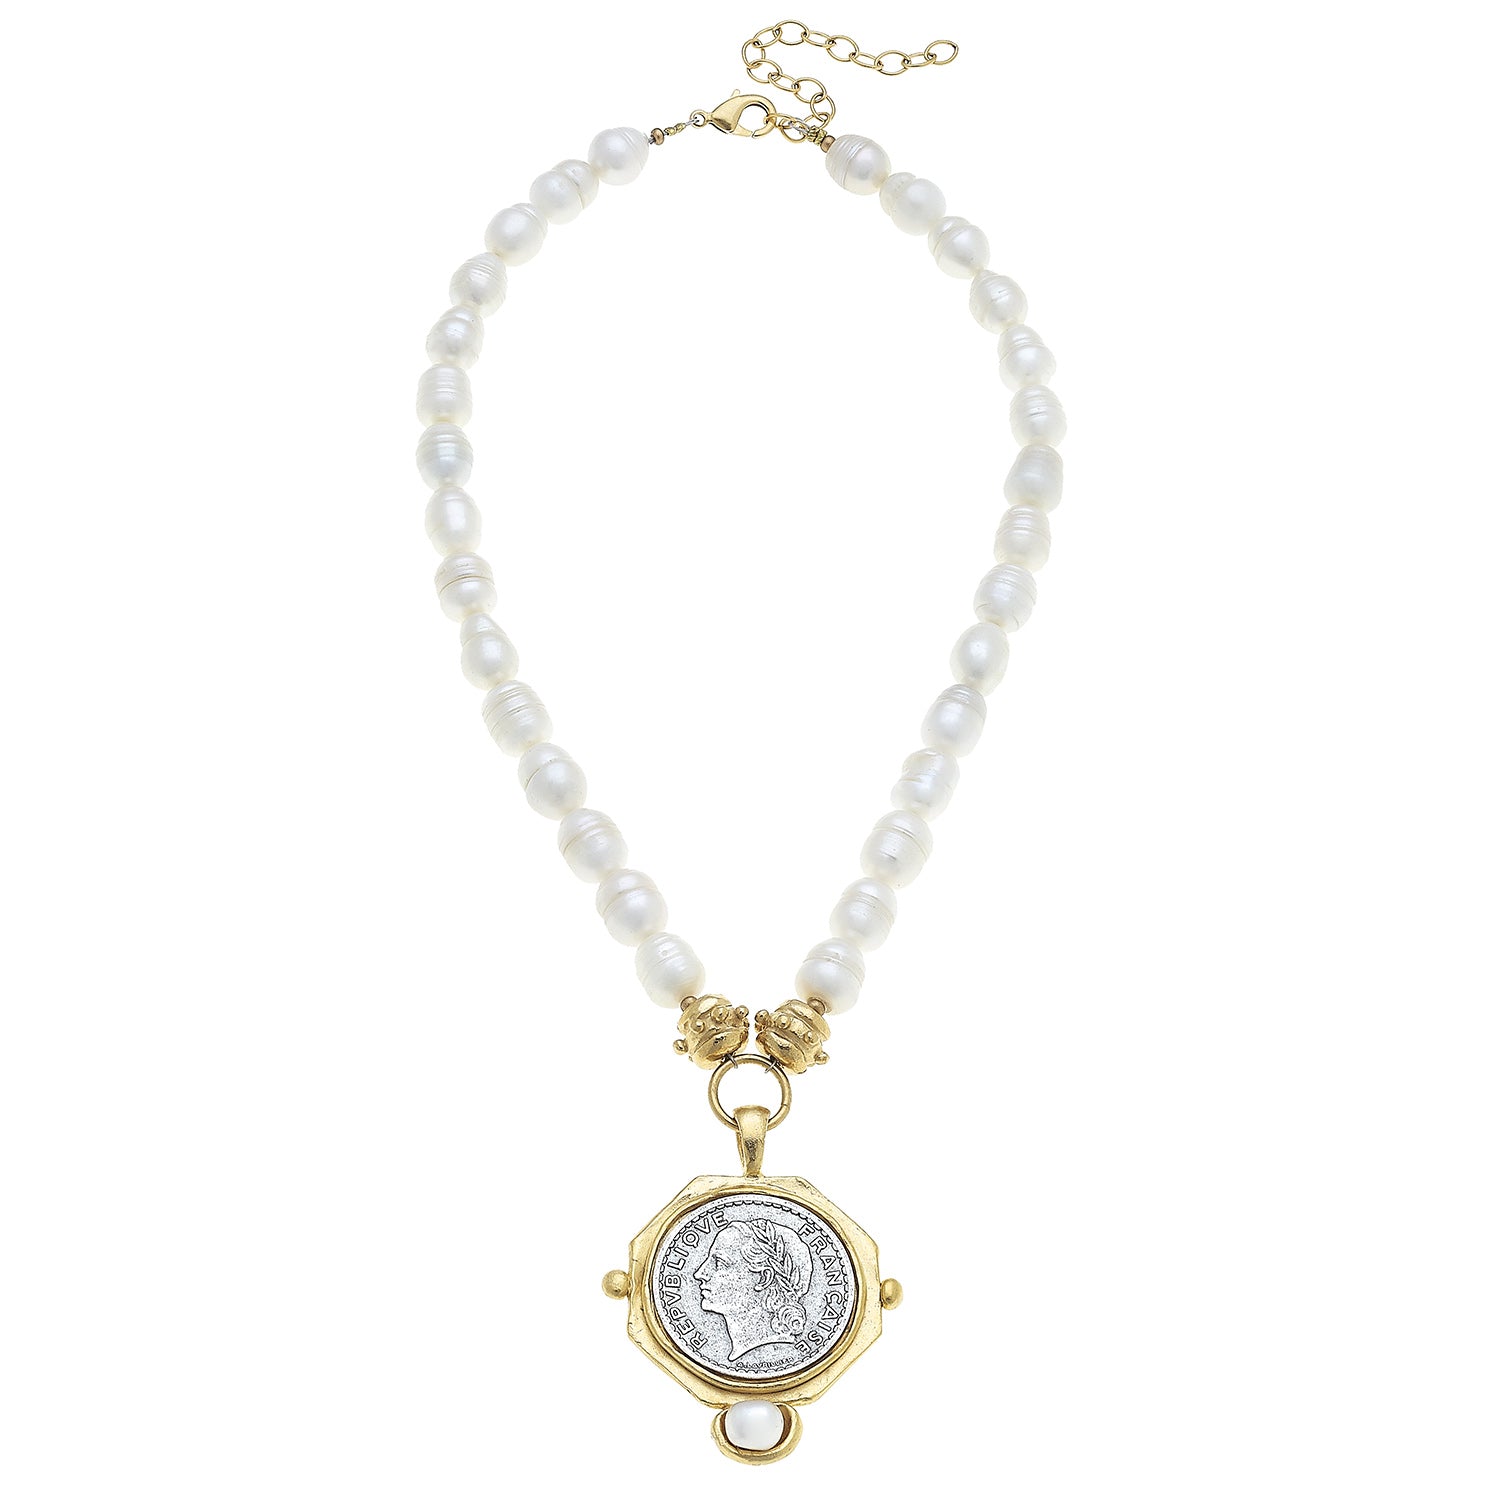 FRENCH FRANC FRESHWATER PEARL NECKLACE